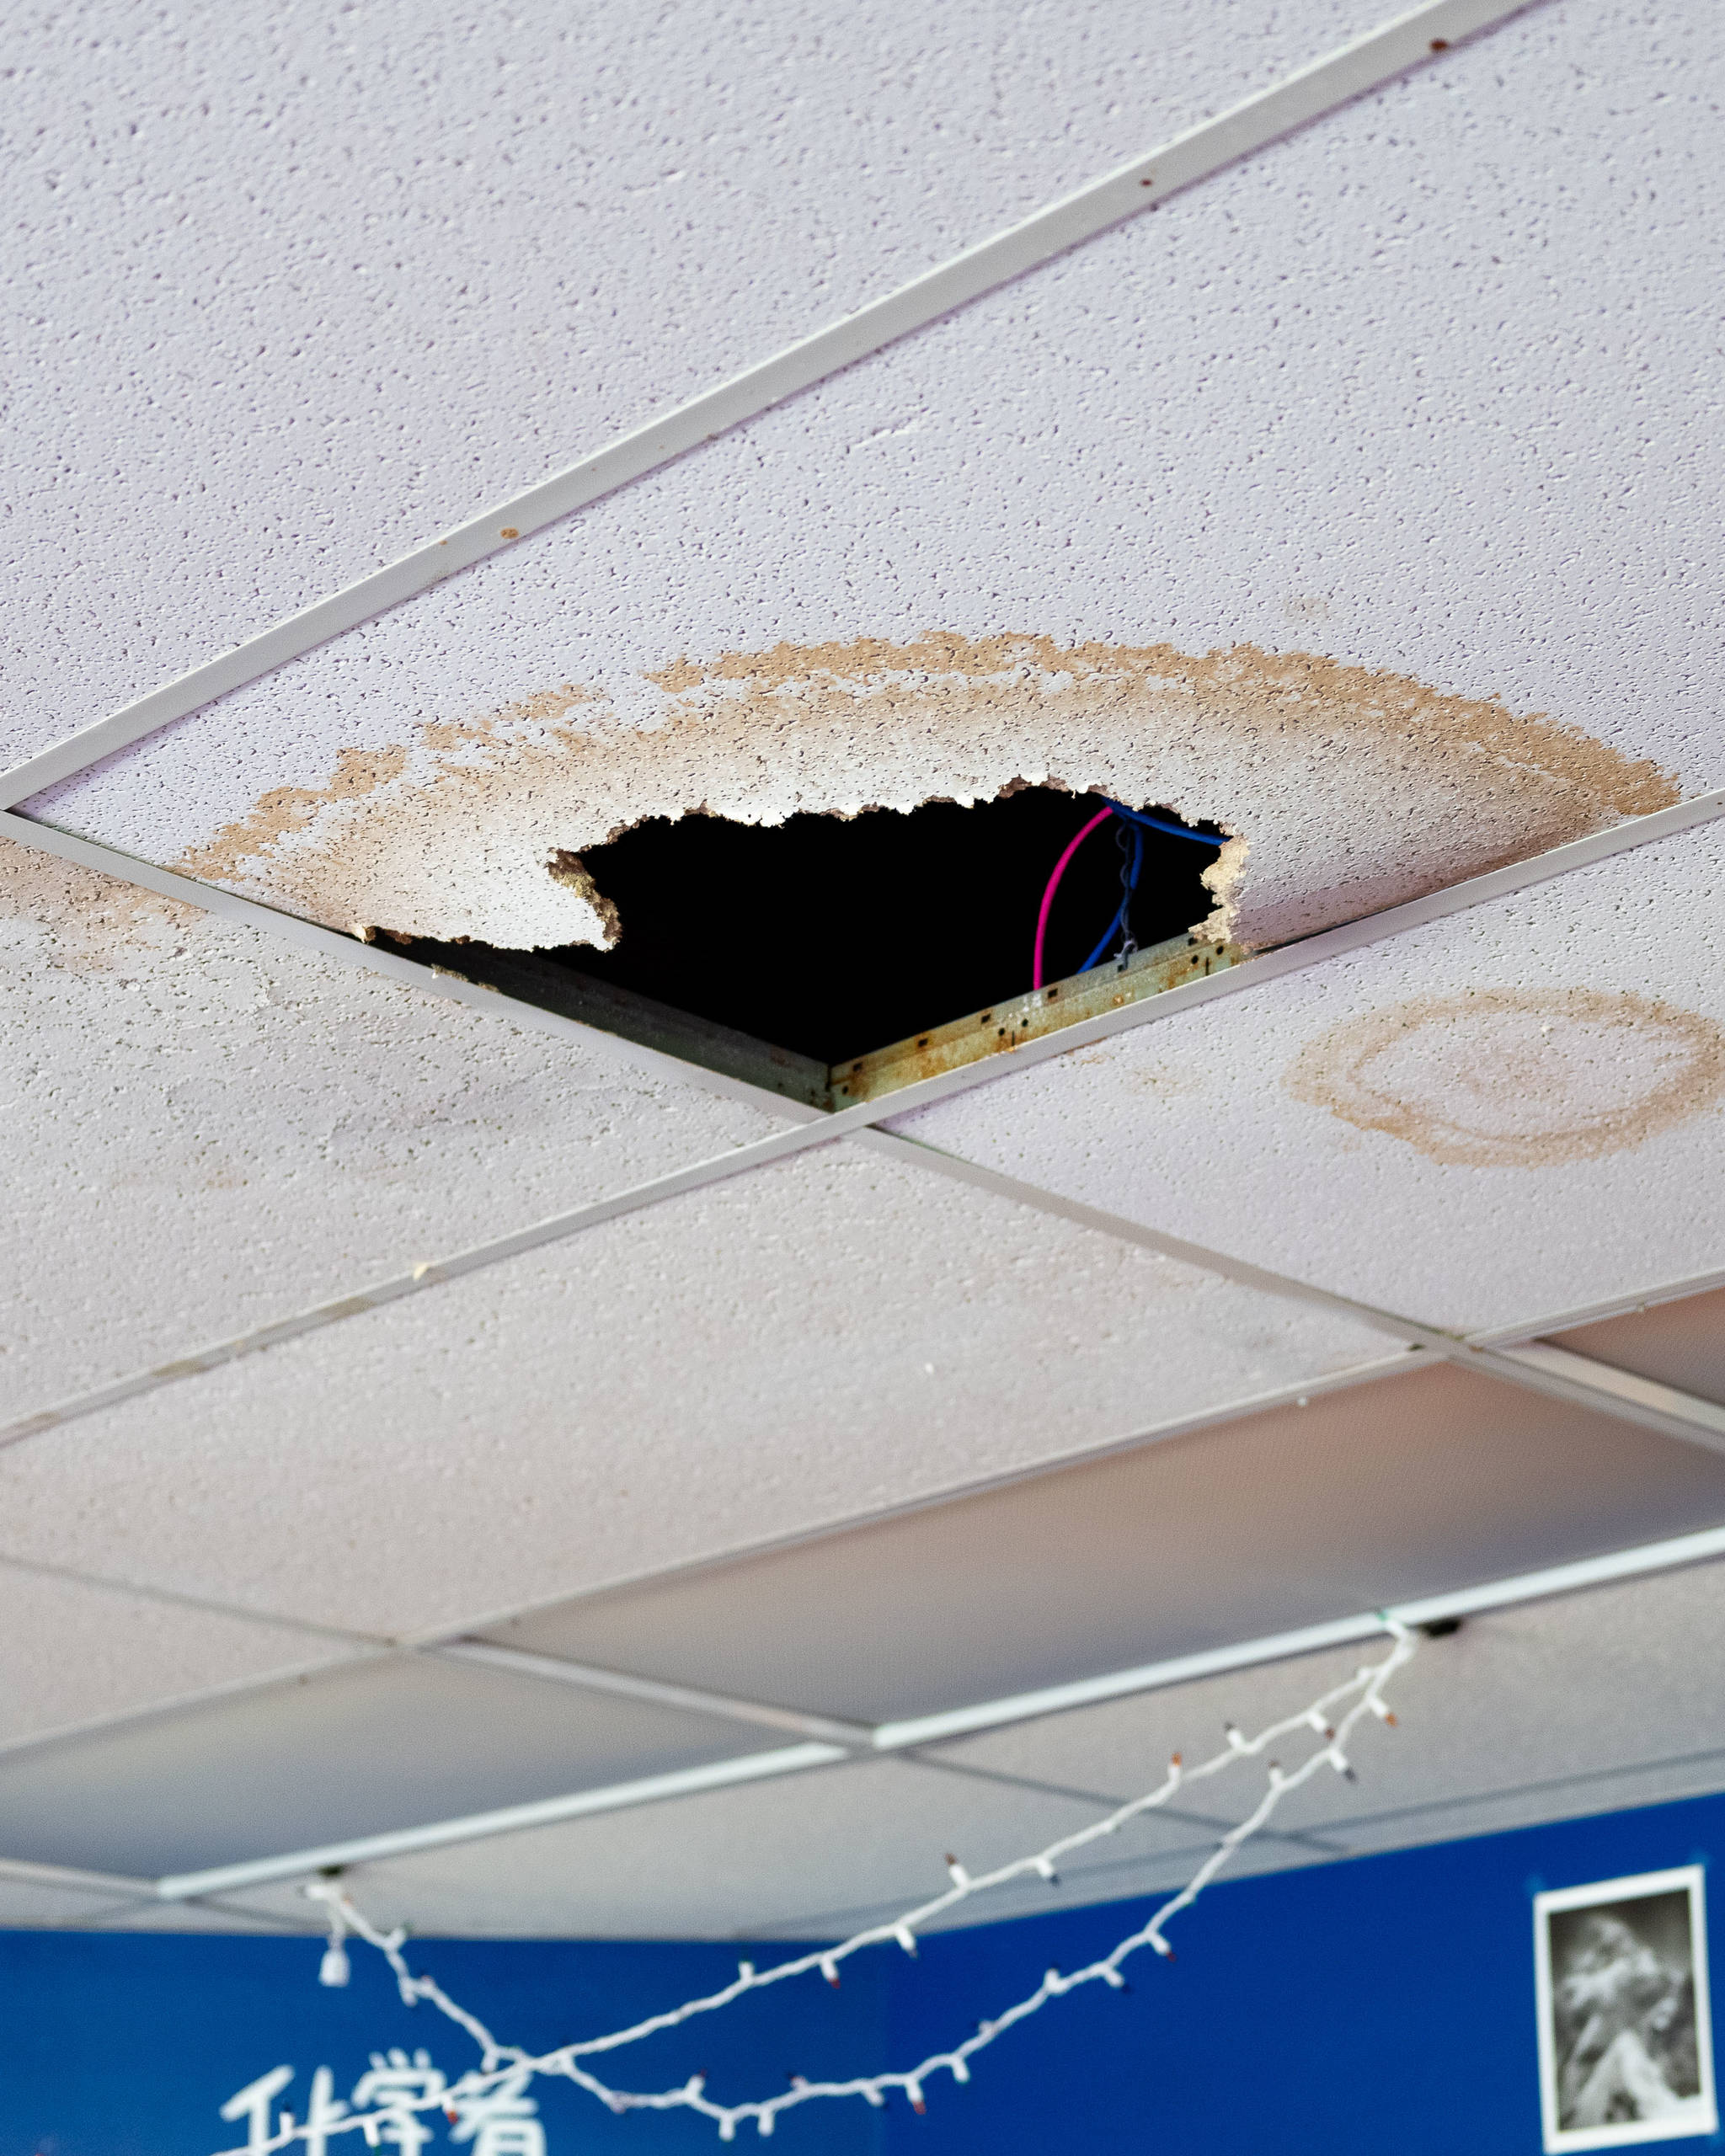 A ceiling panel damaged by water inside a classroom at Seward High School, pictured in May 2021, is the result of a warranty issue that the Kenai Peninsula Borough School District maintenance team said it is working to resolve. (Young Kim for The Hechinger Report)